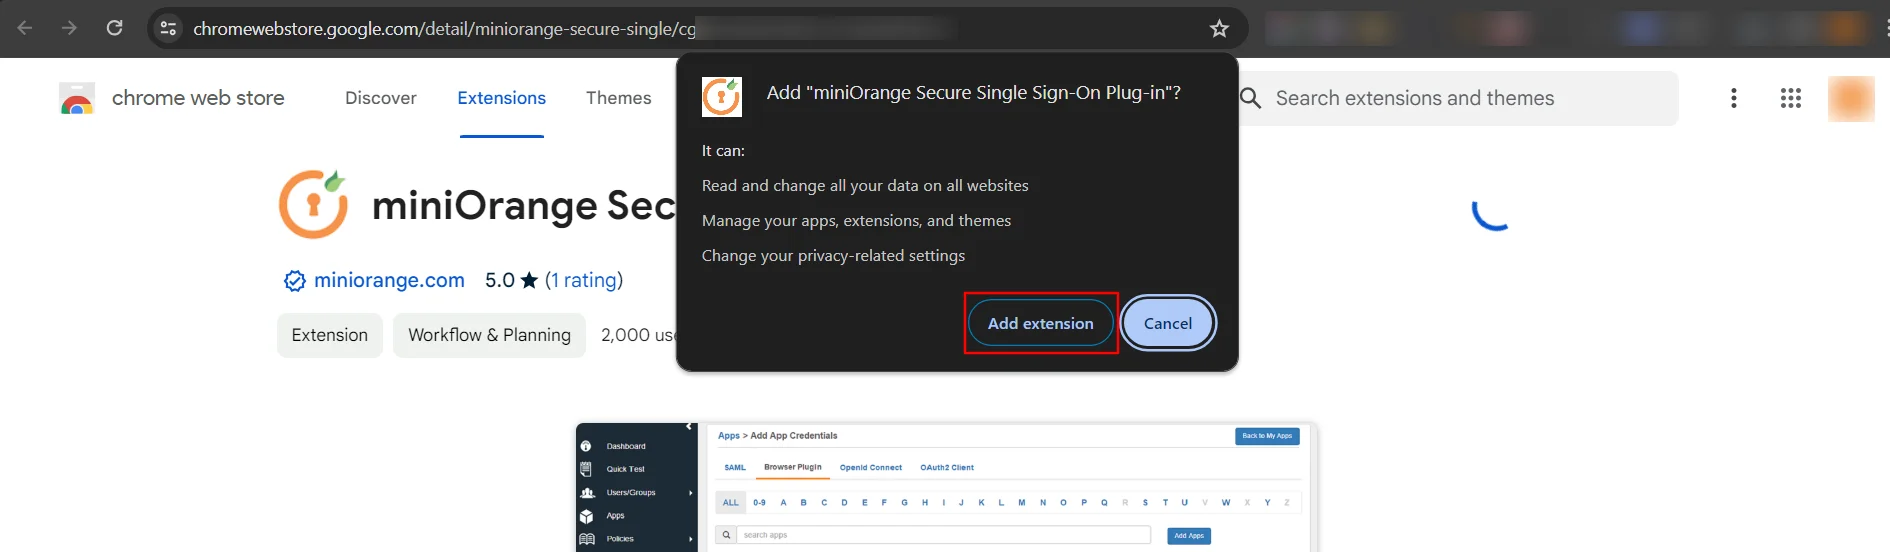 Stripe Single Sign-On (sso) extension added in chrome